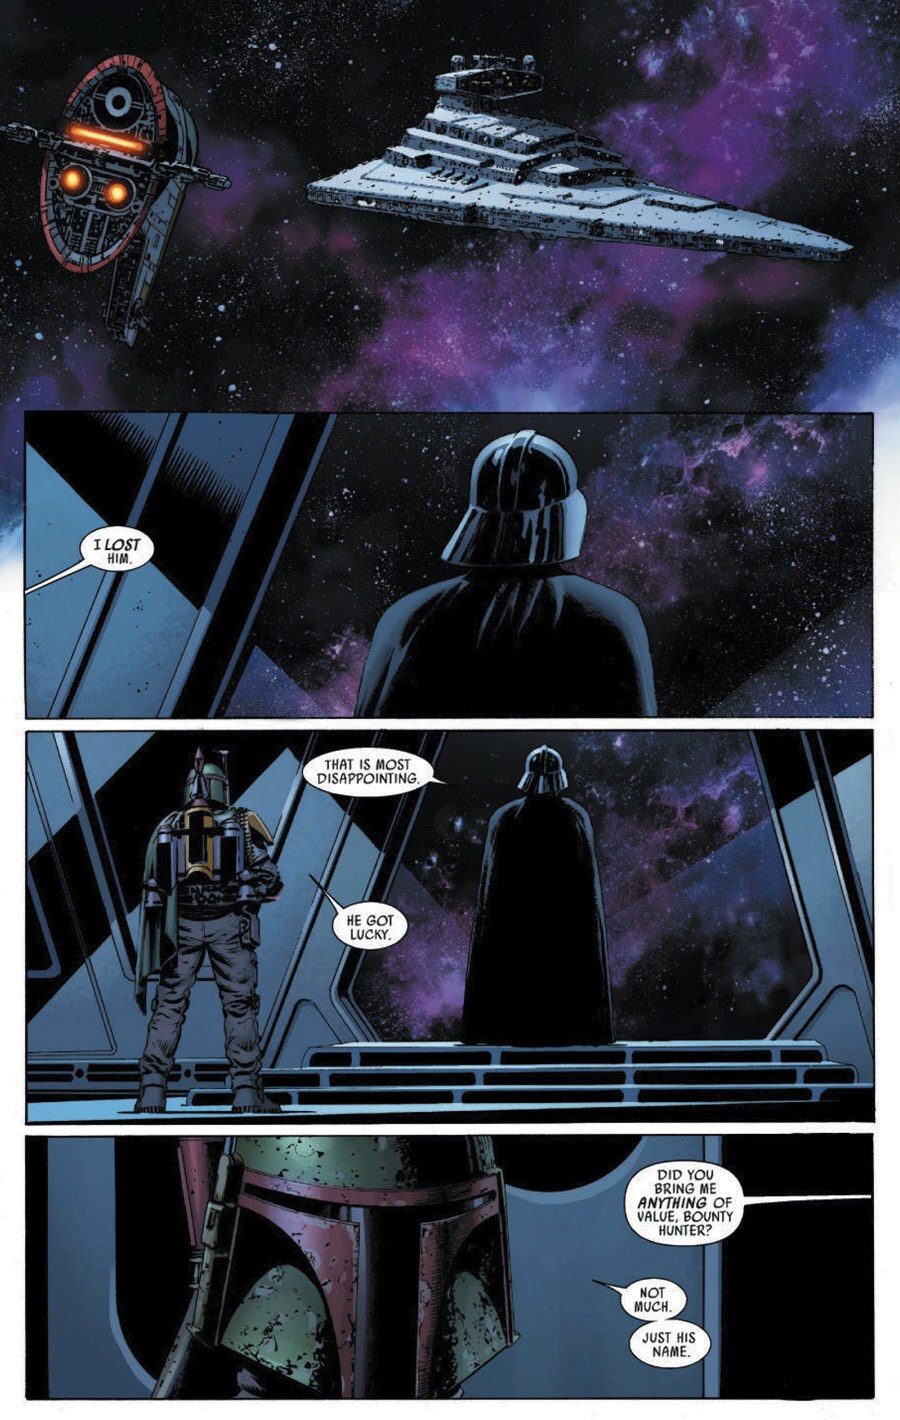 In a series of comic book panels, Darth Vader looks out a window while Boba Fett informs him that he lost track of the Rebel fighter he was pursuing, but did get his name.